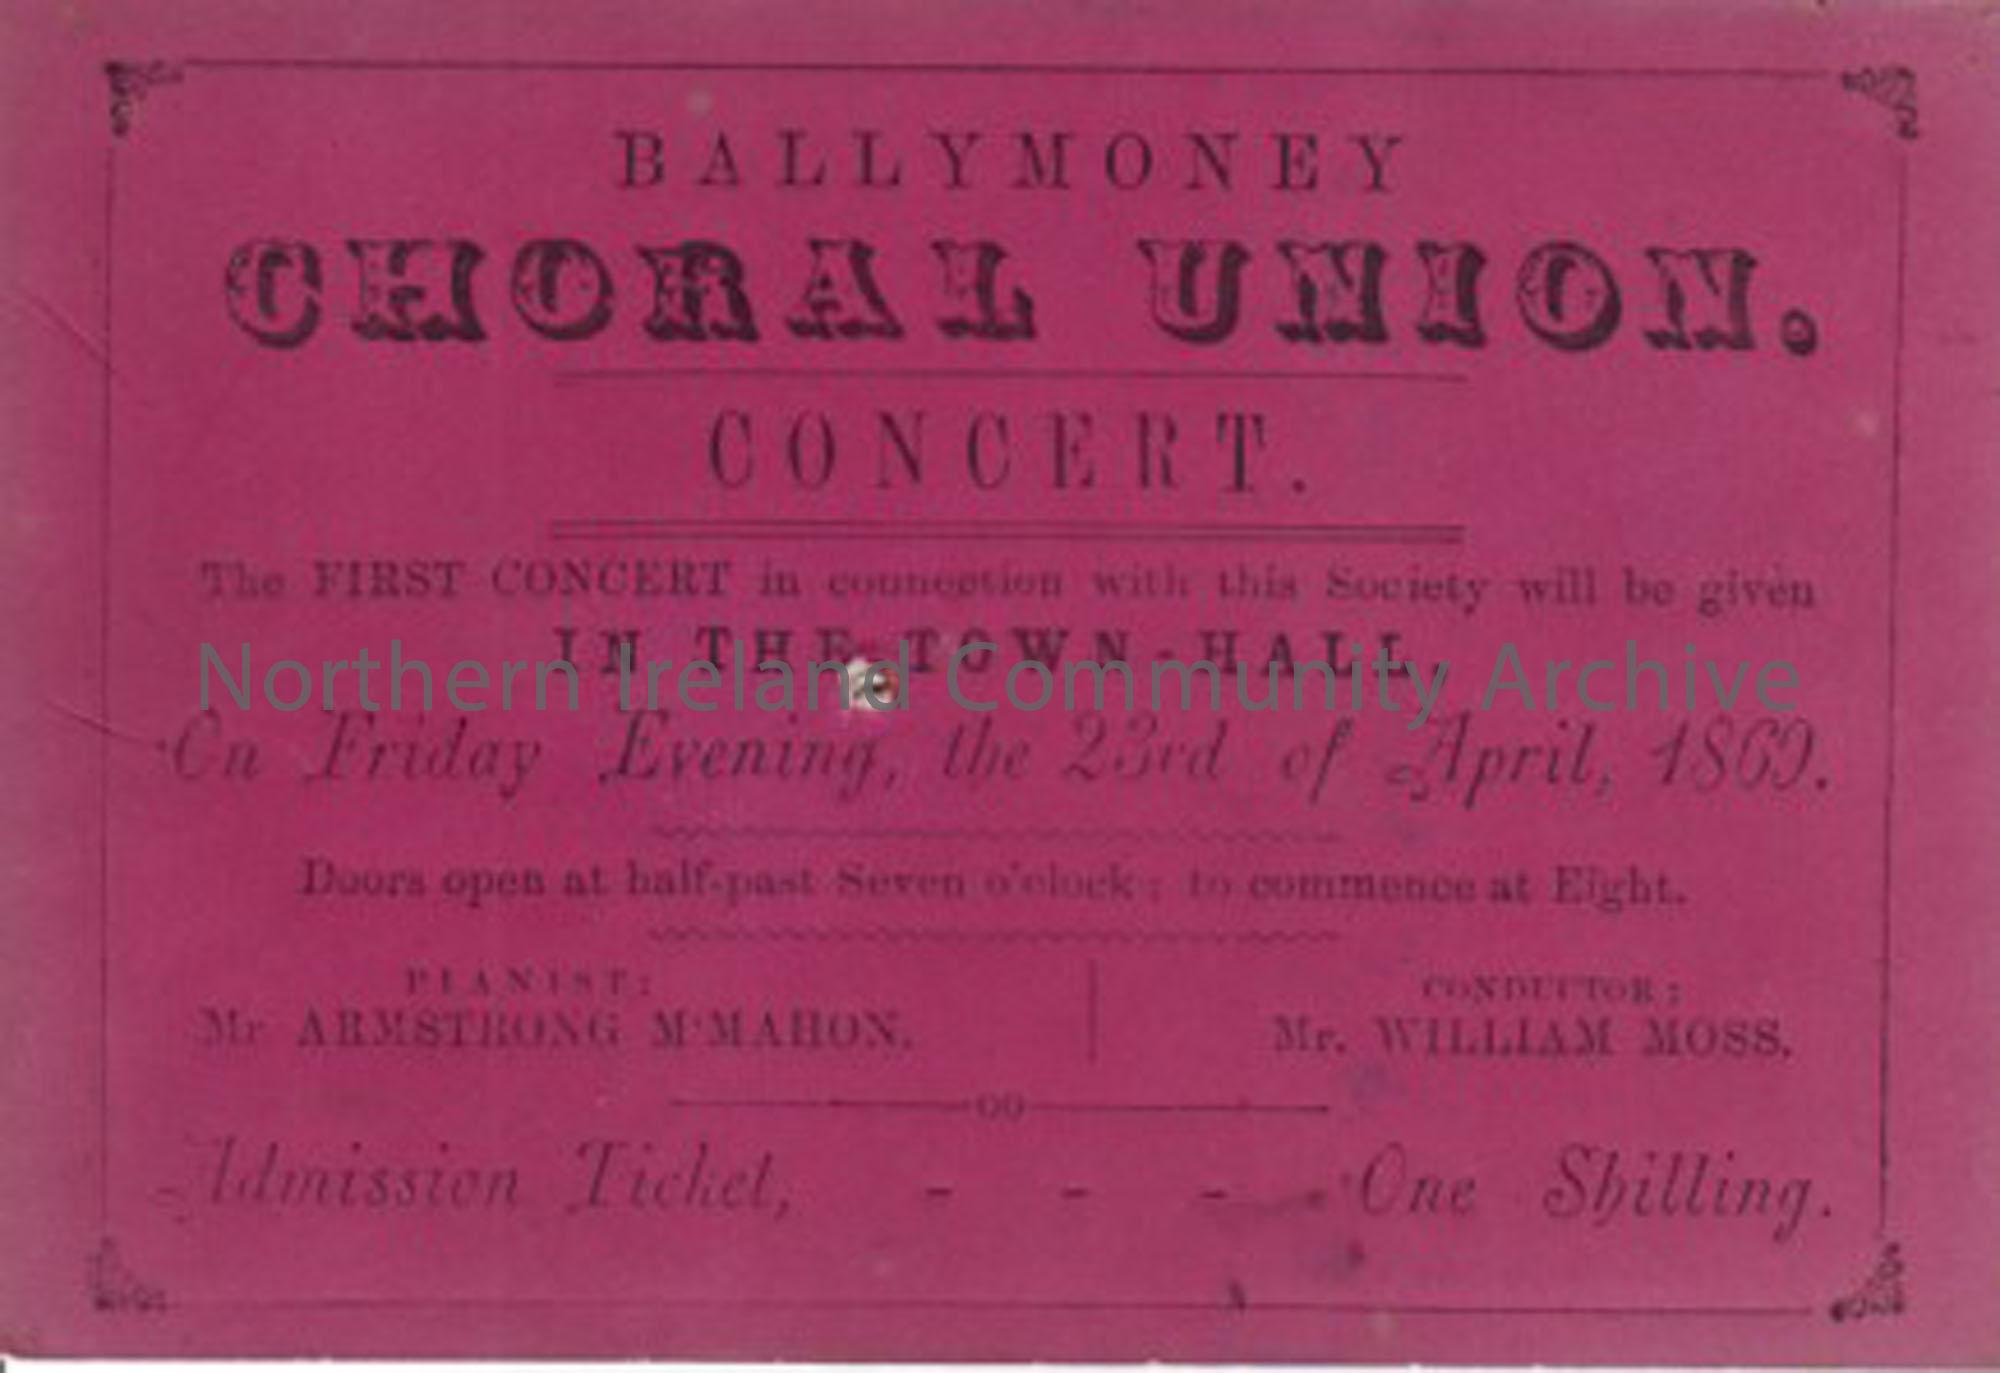 Ballymoney Choral Union concert purple ticket. The first concert in connection with this society will be given in the Town-Hall, On Friday Evening, th…